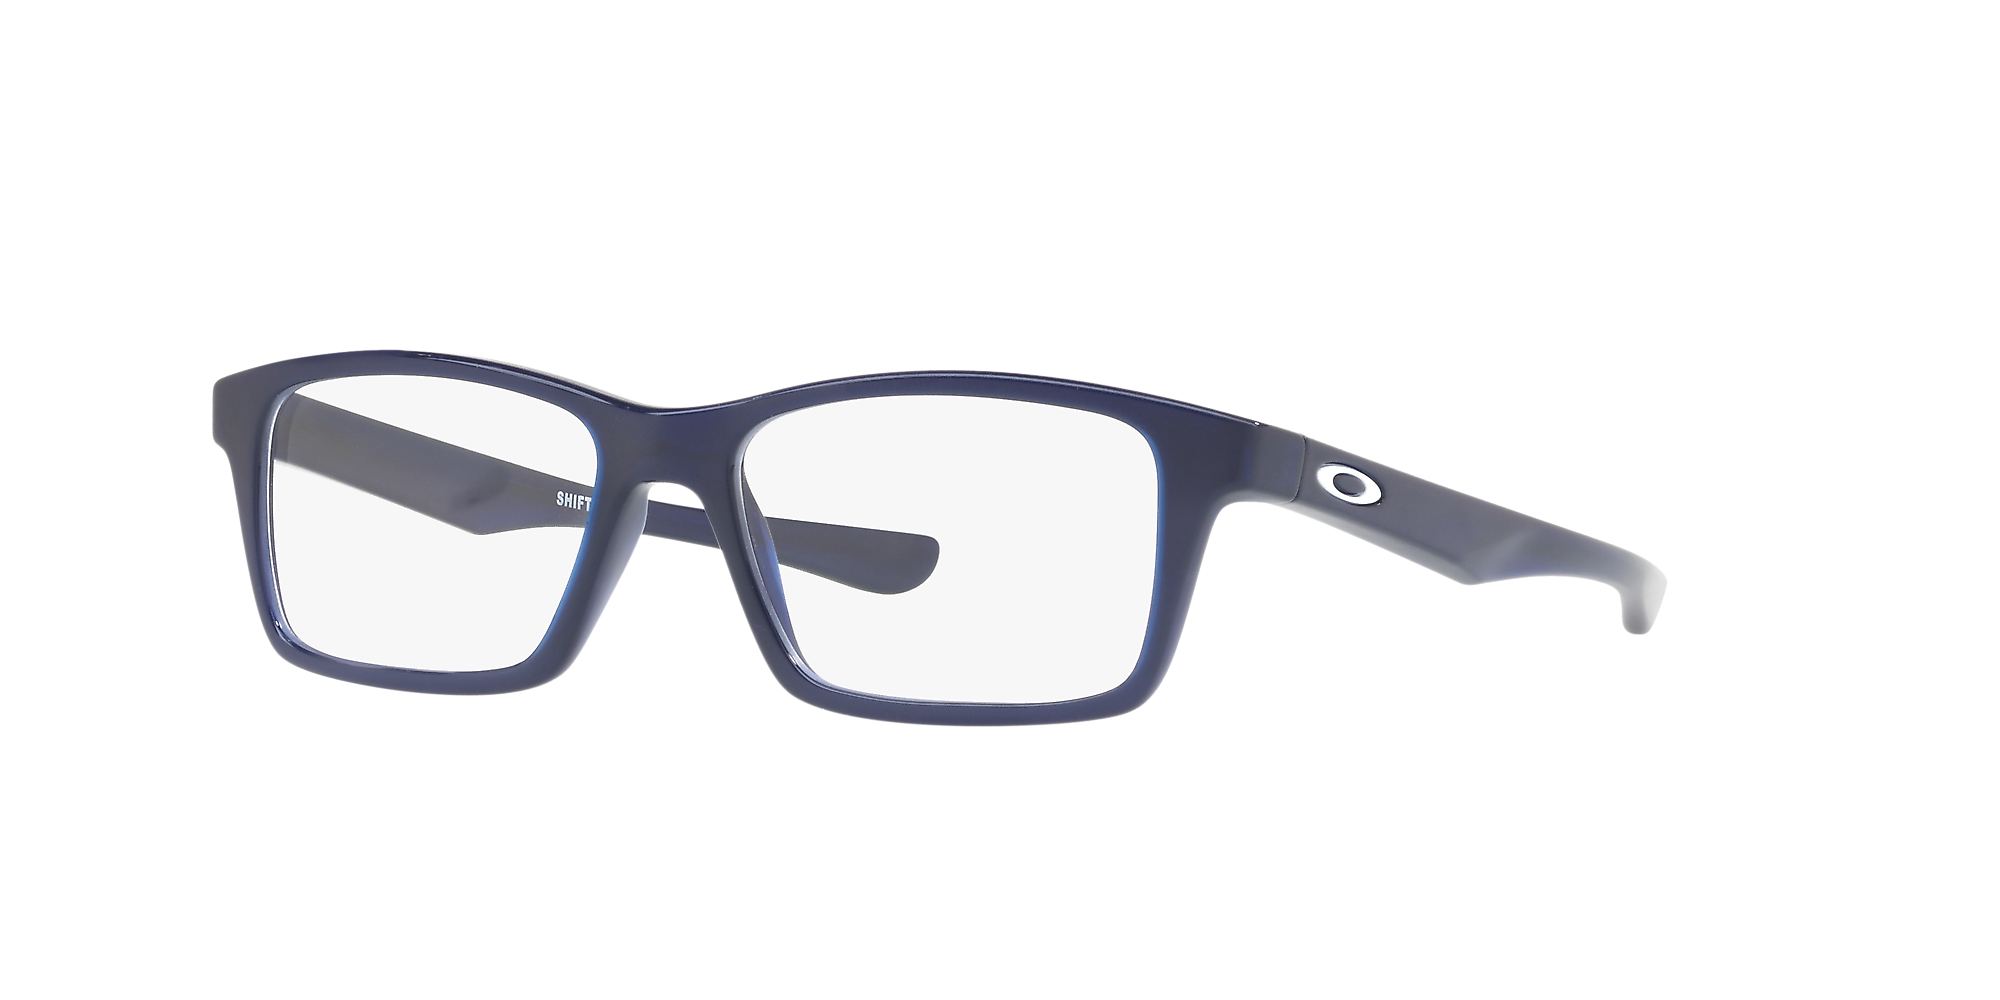 0OY8001 OY8001 Shifter XS (Youth Fit) Glasses in | OPSM